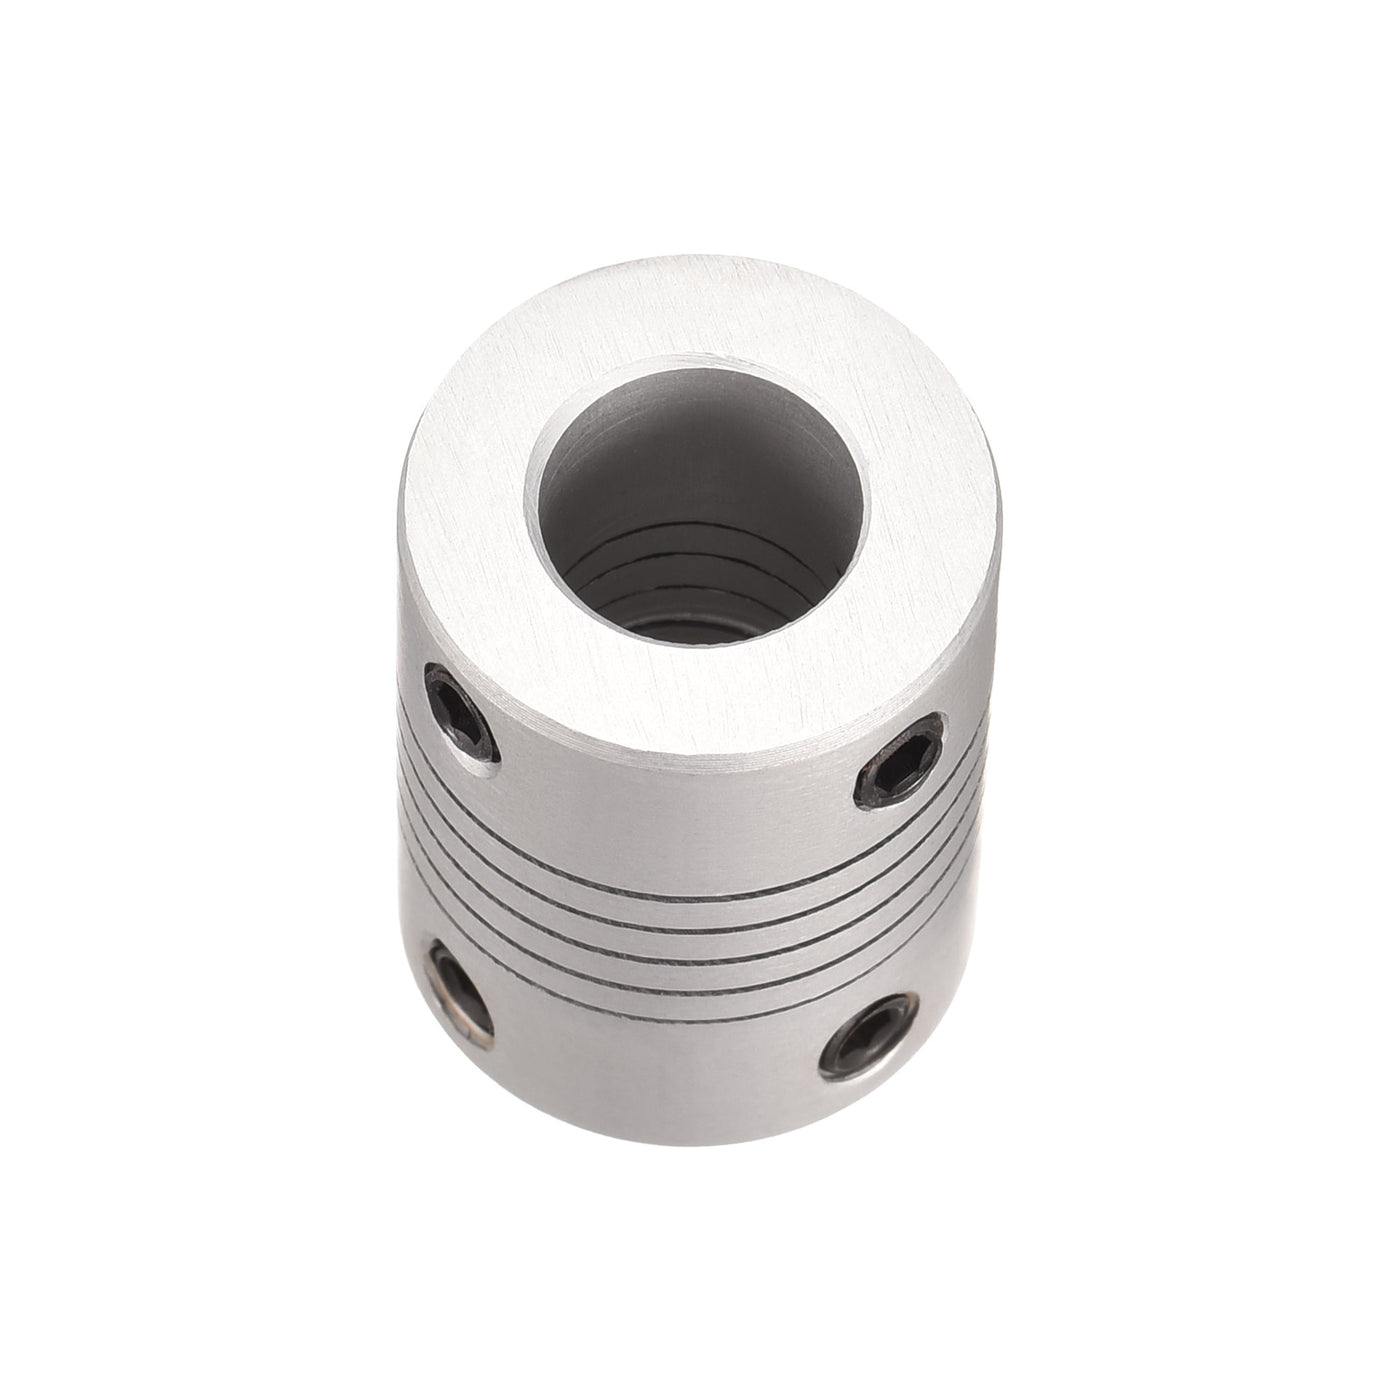 uxcell Uxcell 5mm to 10mm Aluminum Alloy Shaft Coupling Flexible Coupler L25xD19 Silver,2pcs